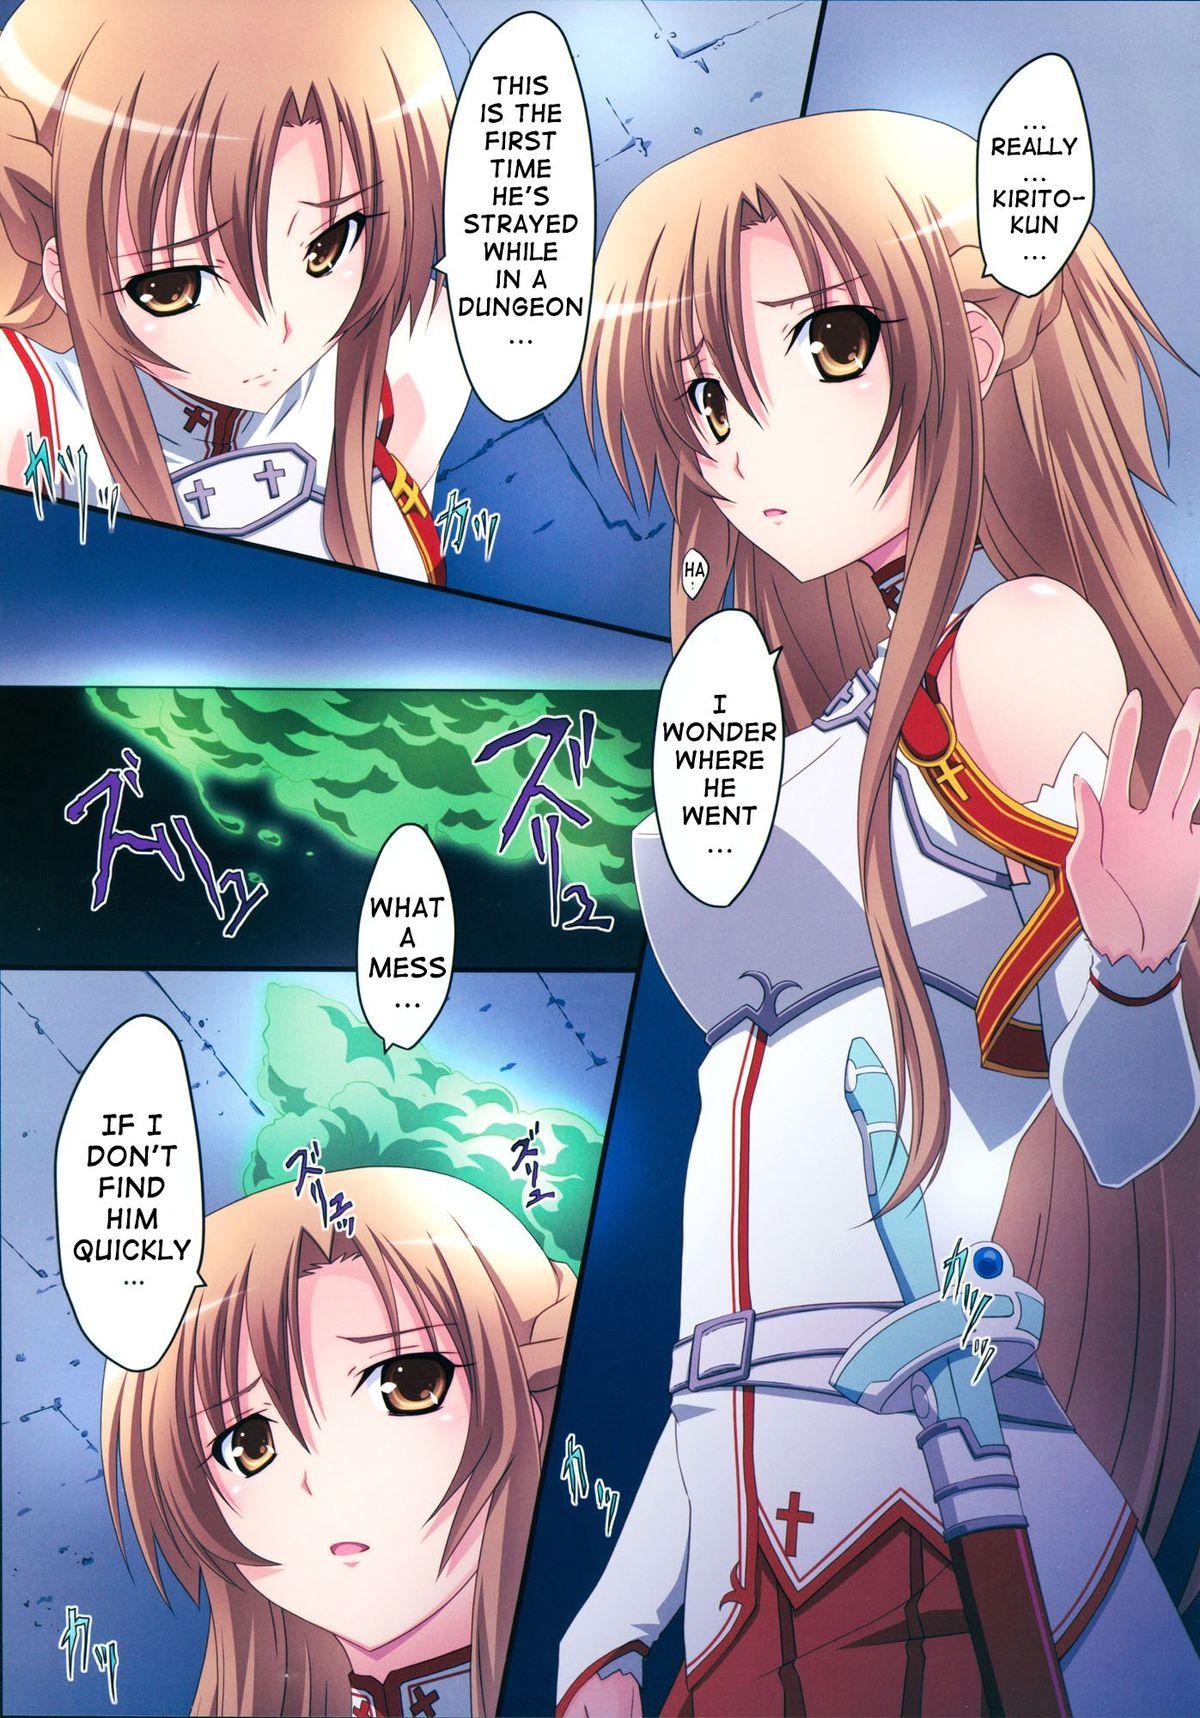 Solo Girl Asuna! Close Call - Sword art online Verification - Page 4